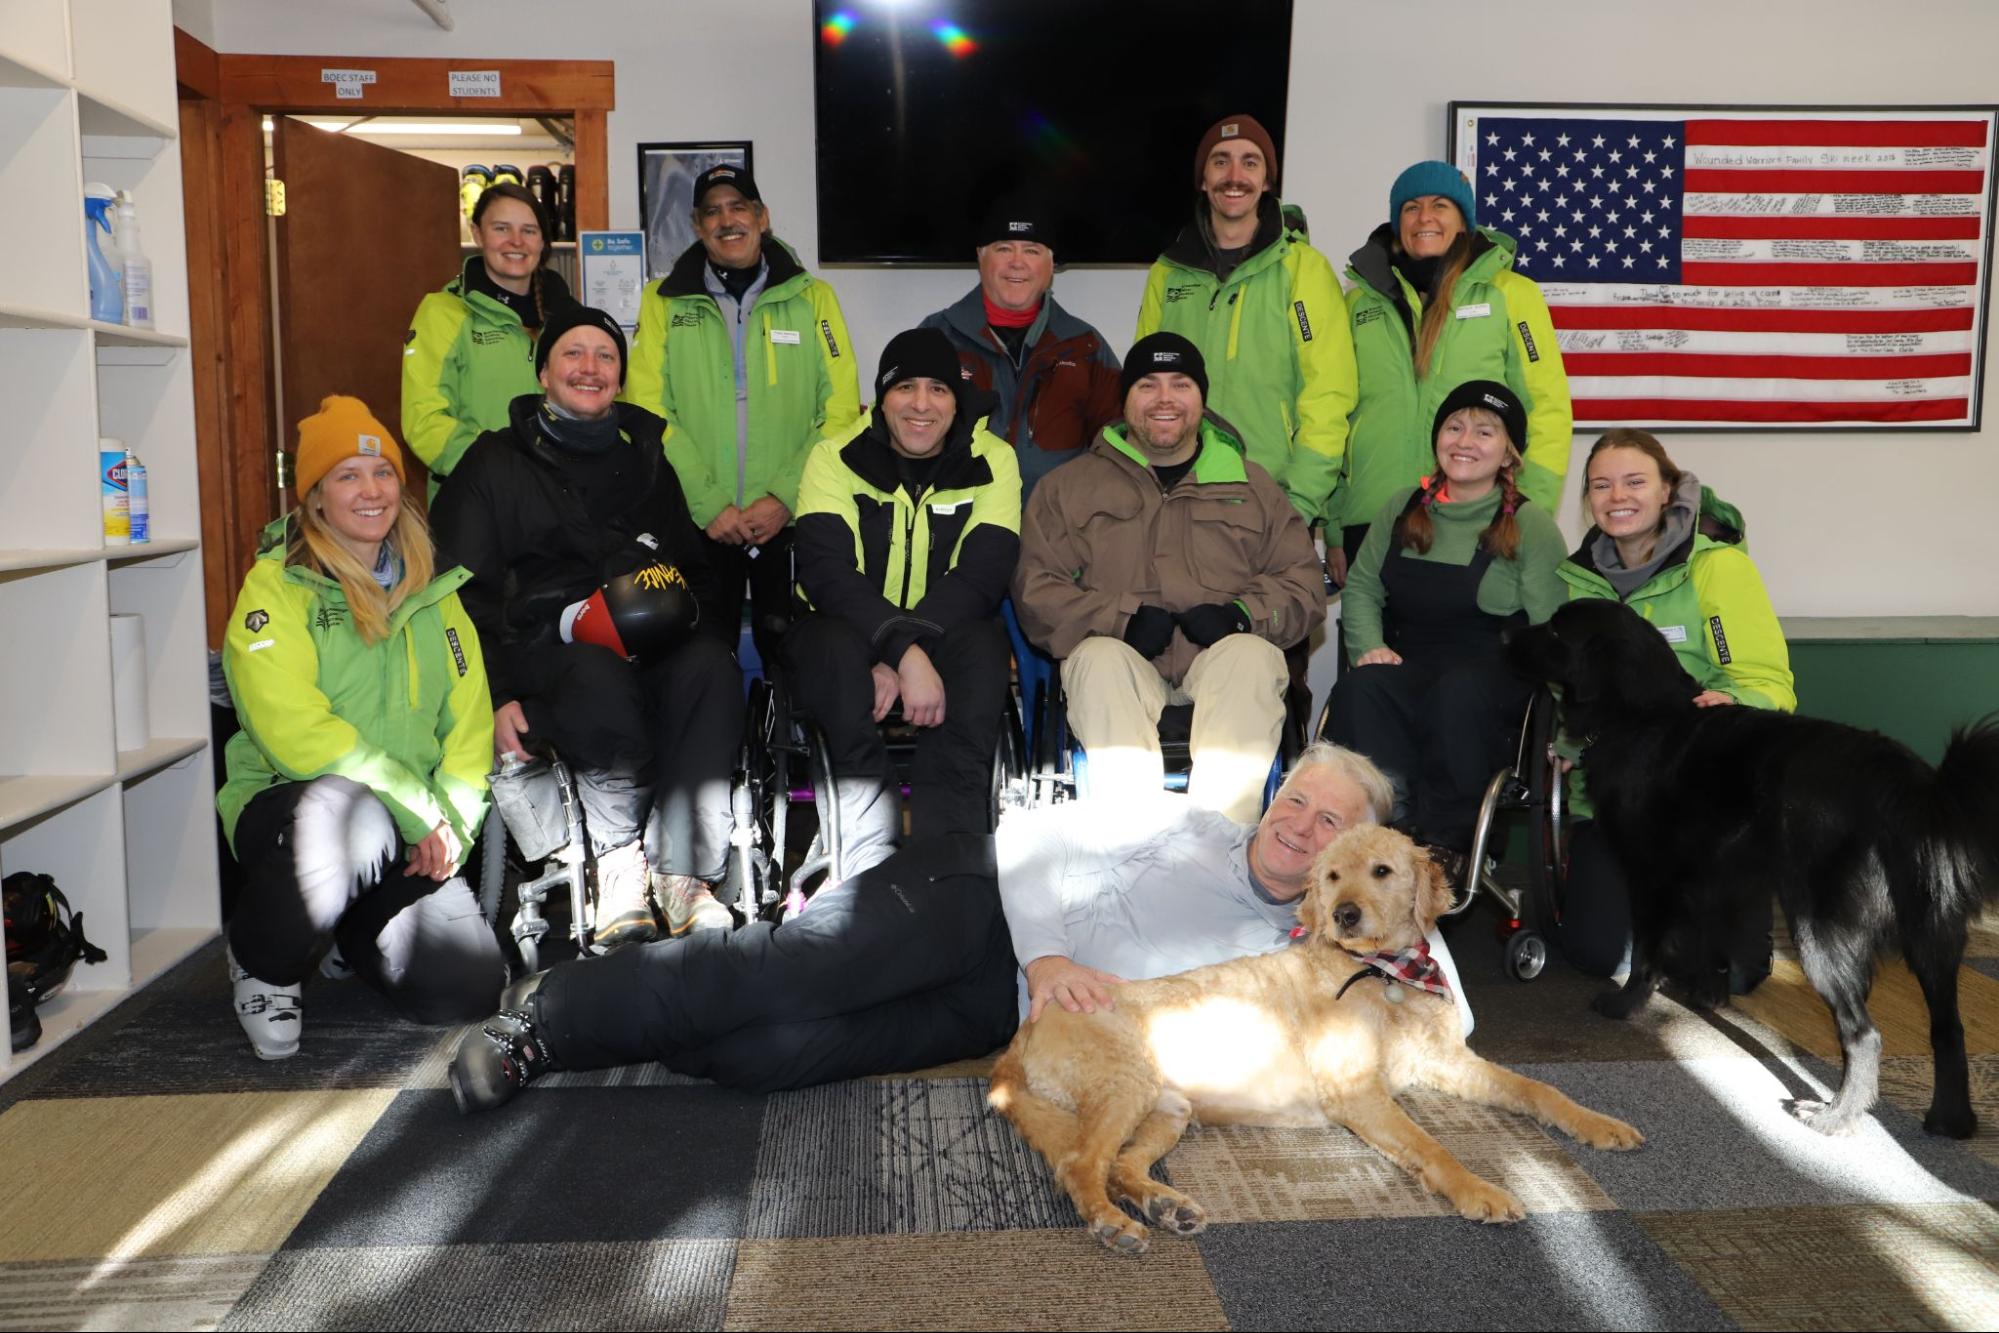 Mono-ski camp group (Frank is second from the left in the back row).